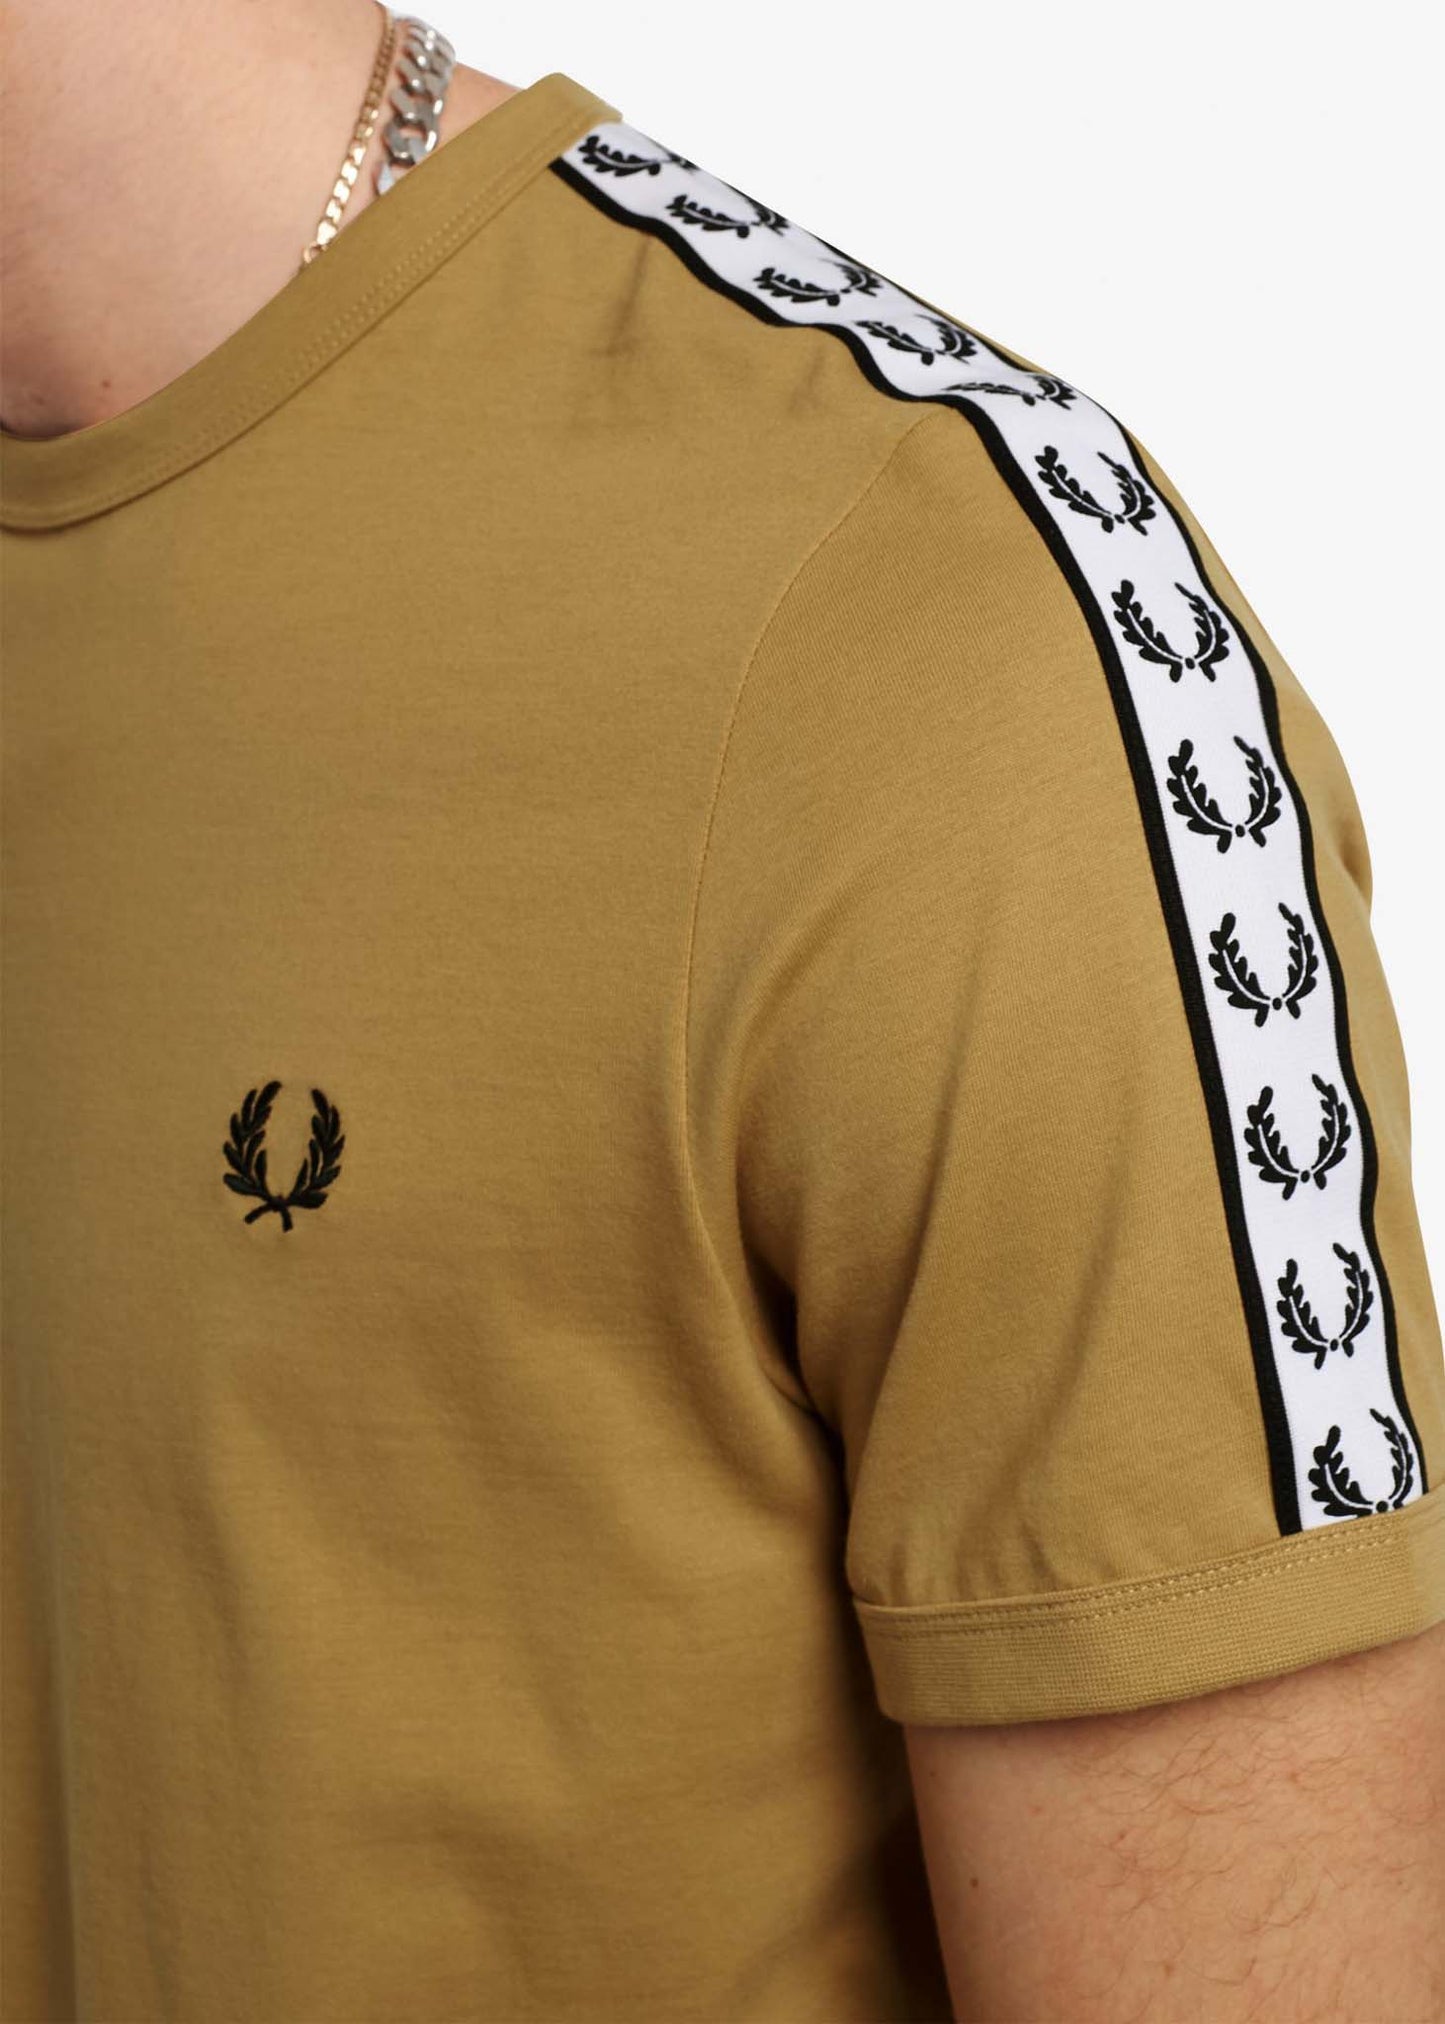 Fred Perry T-shirts  Taped ringer t-shirt - desert 